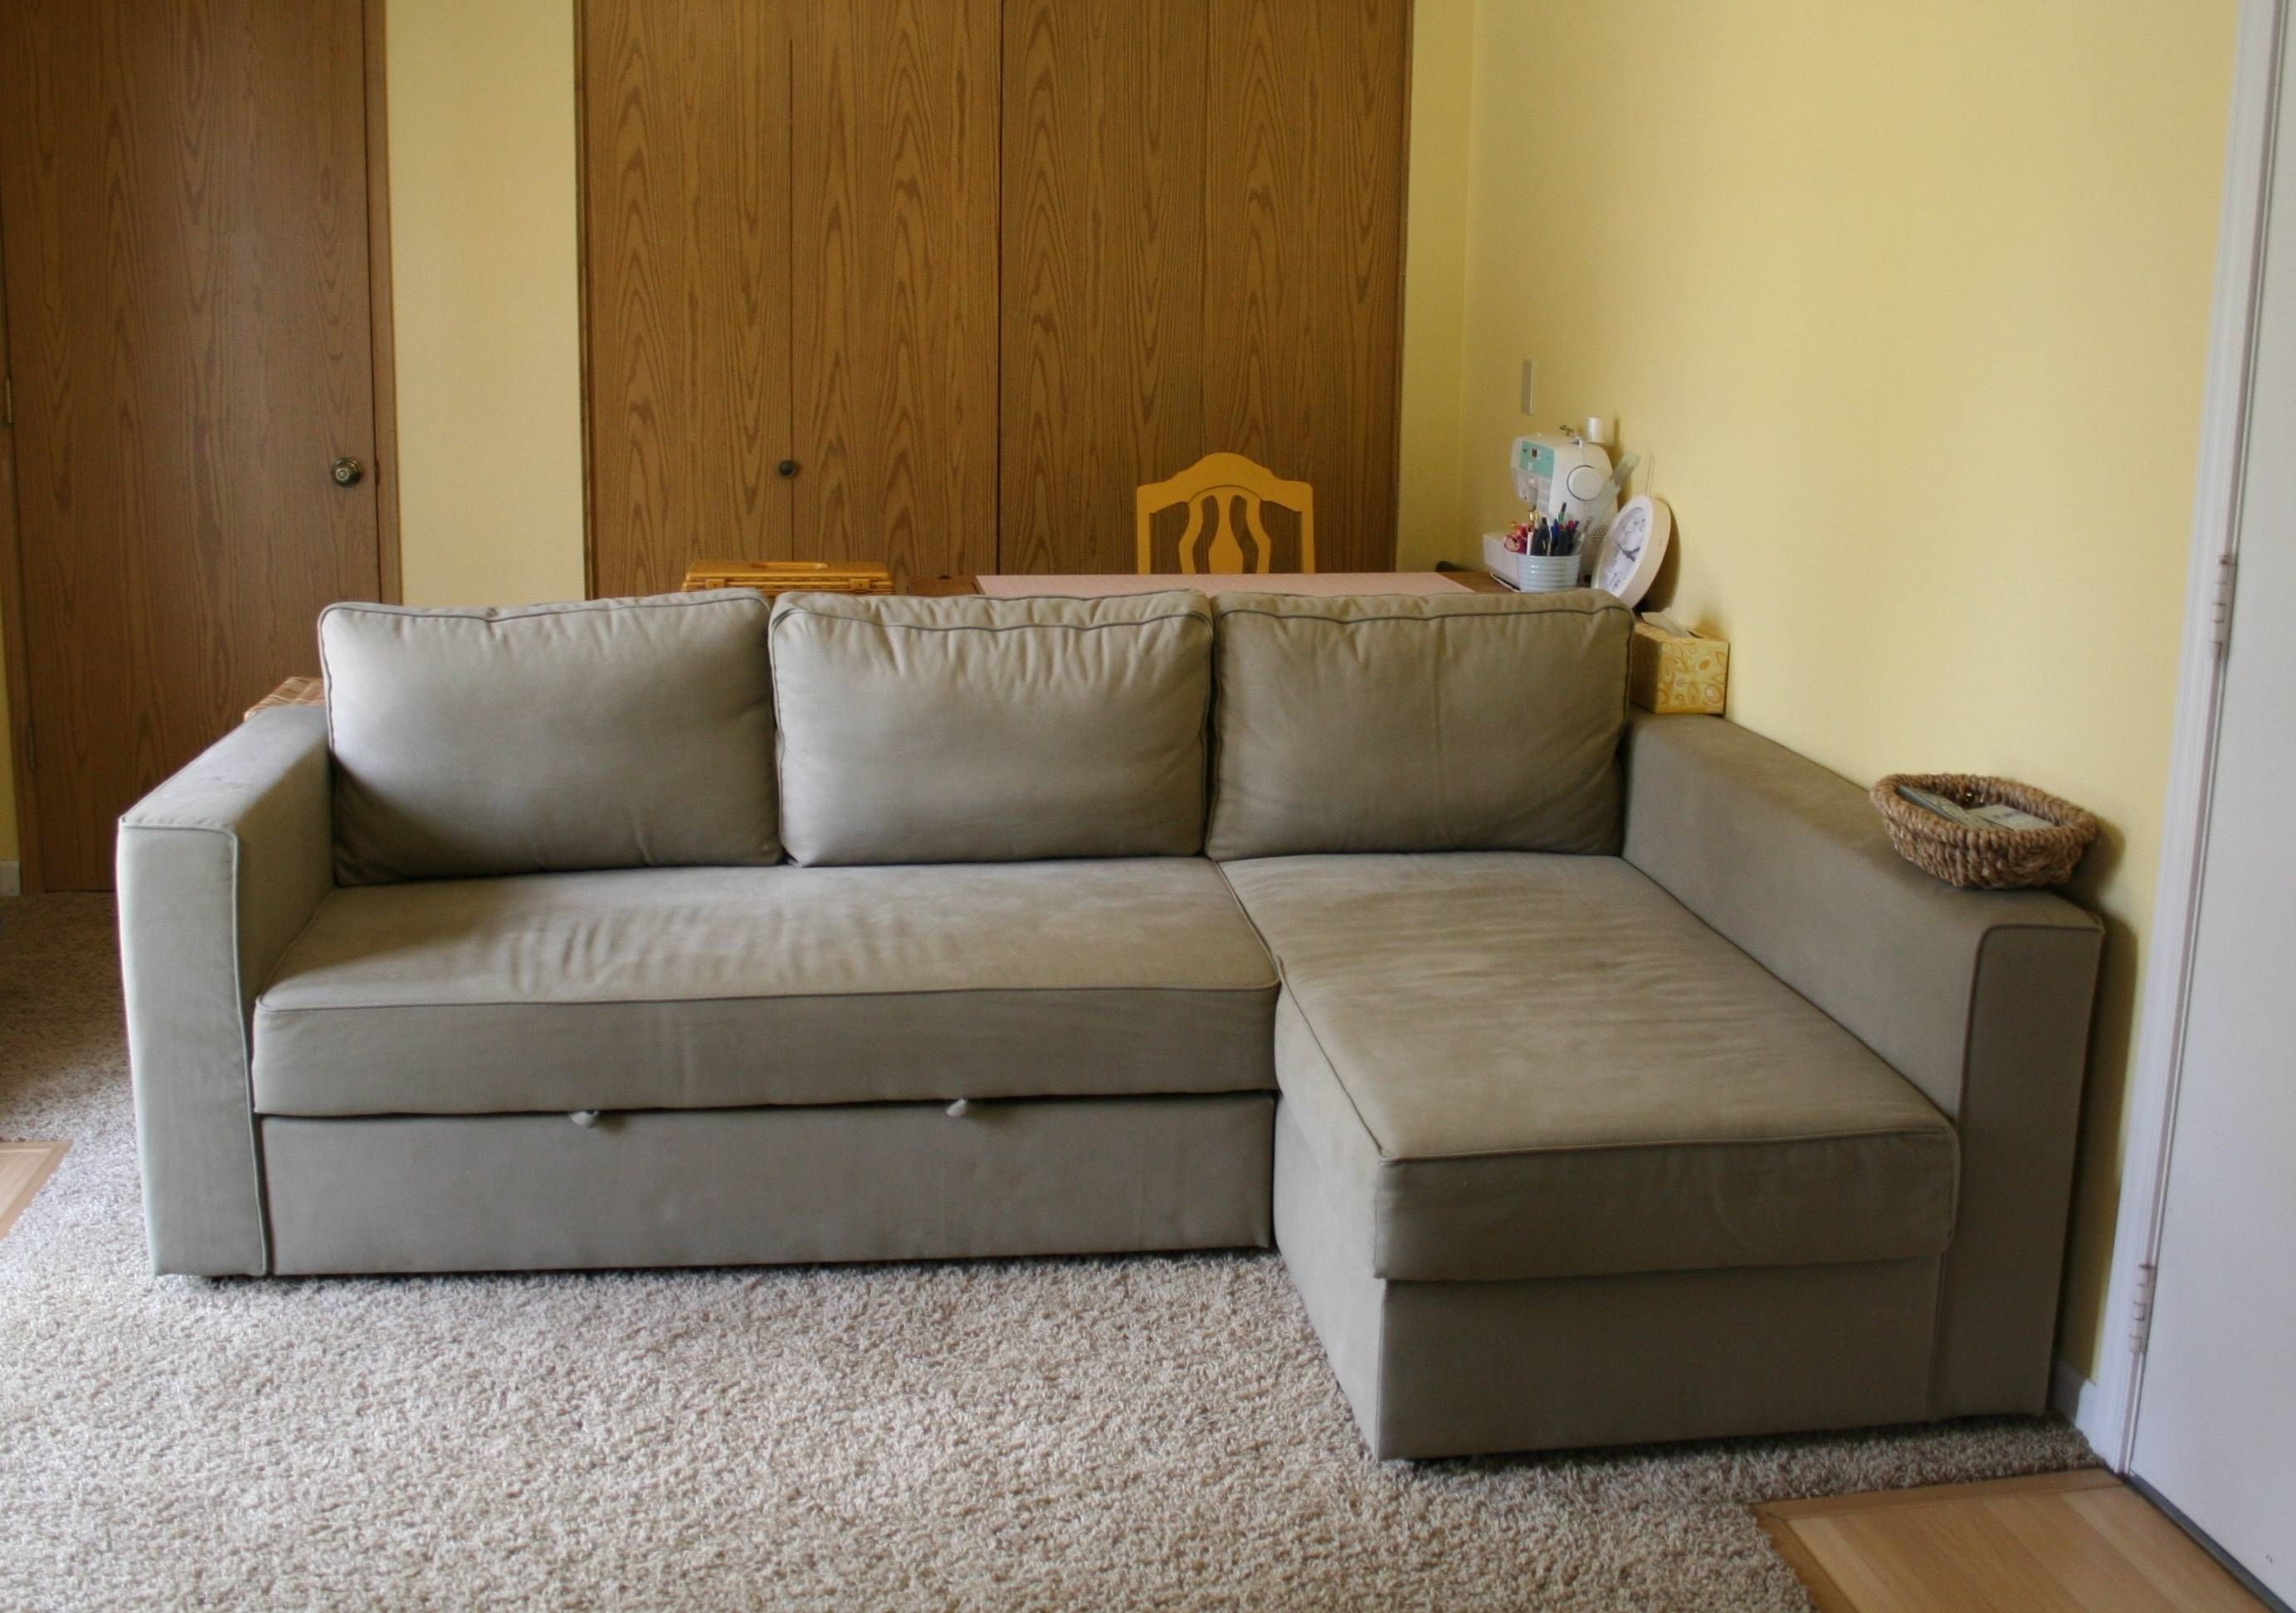 ikea sectional sofa bed with storage